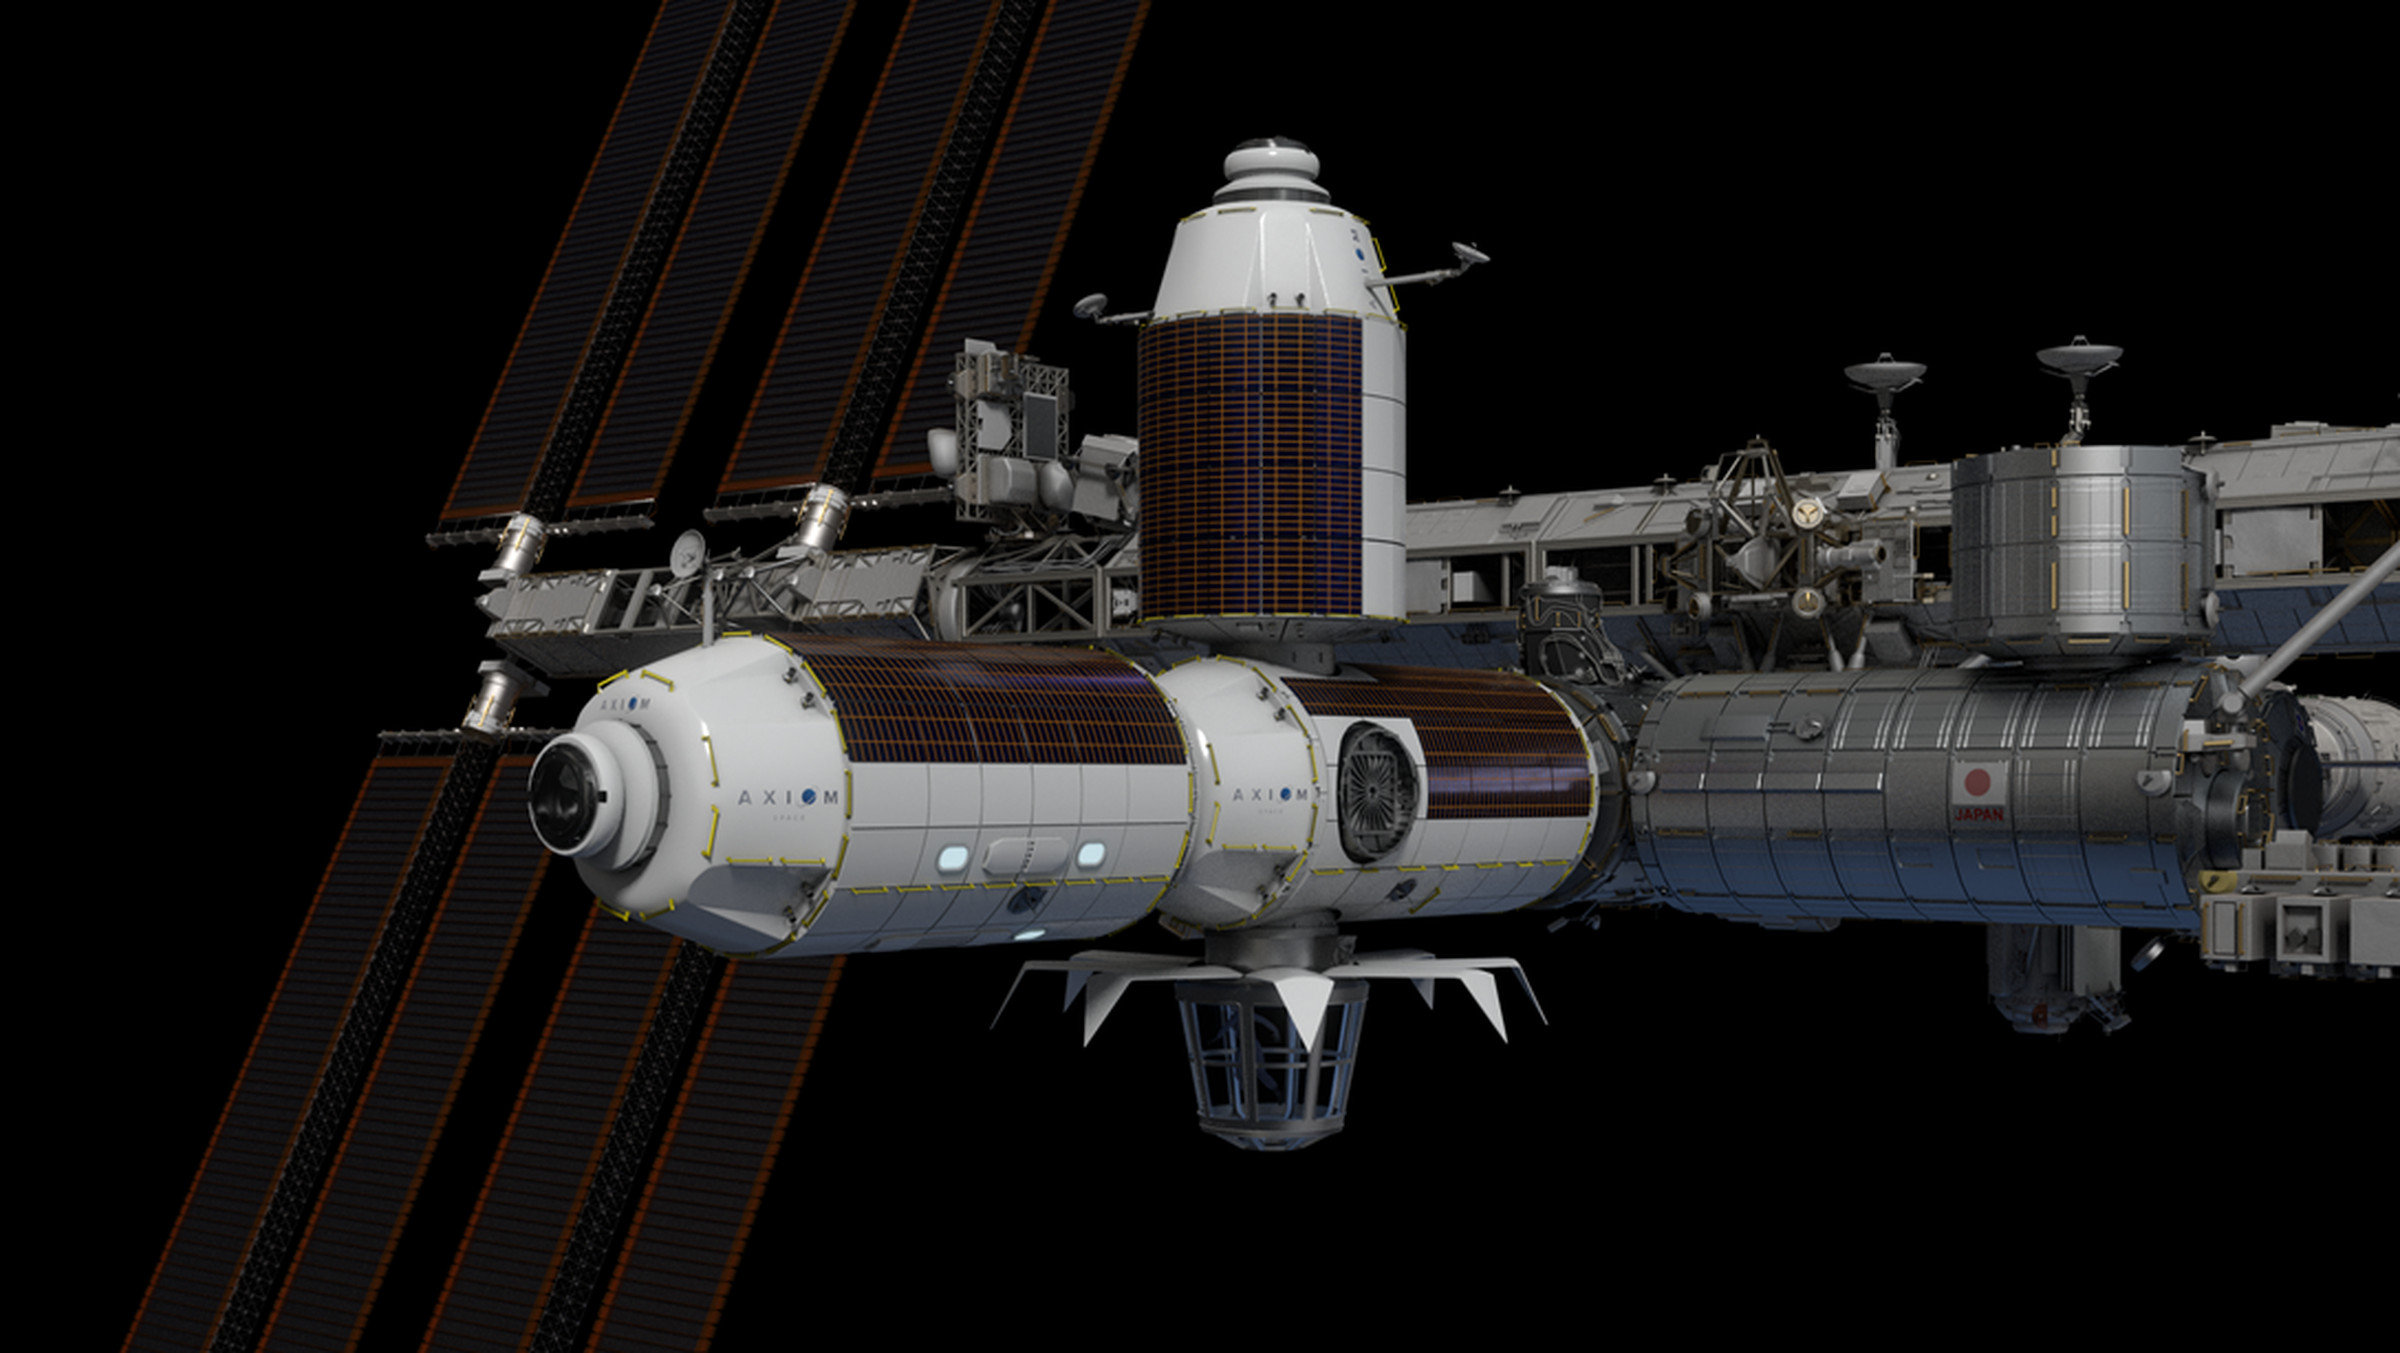 An artistic rendering of Axiom’s proposed space station module attached to the ISS.